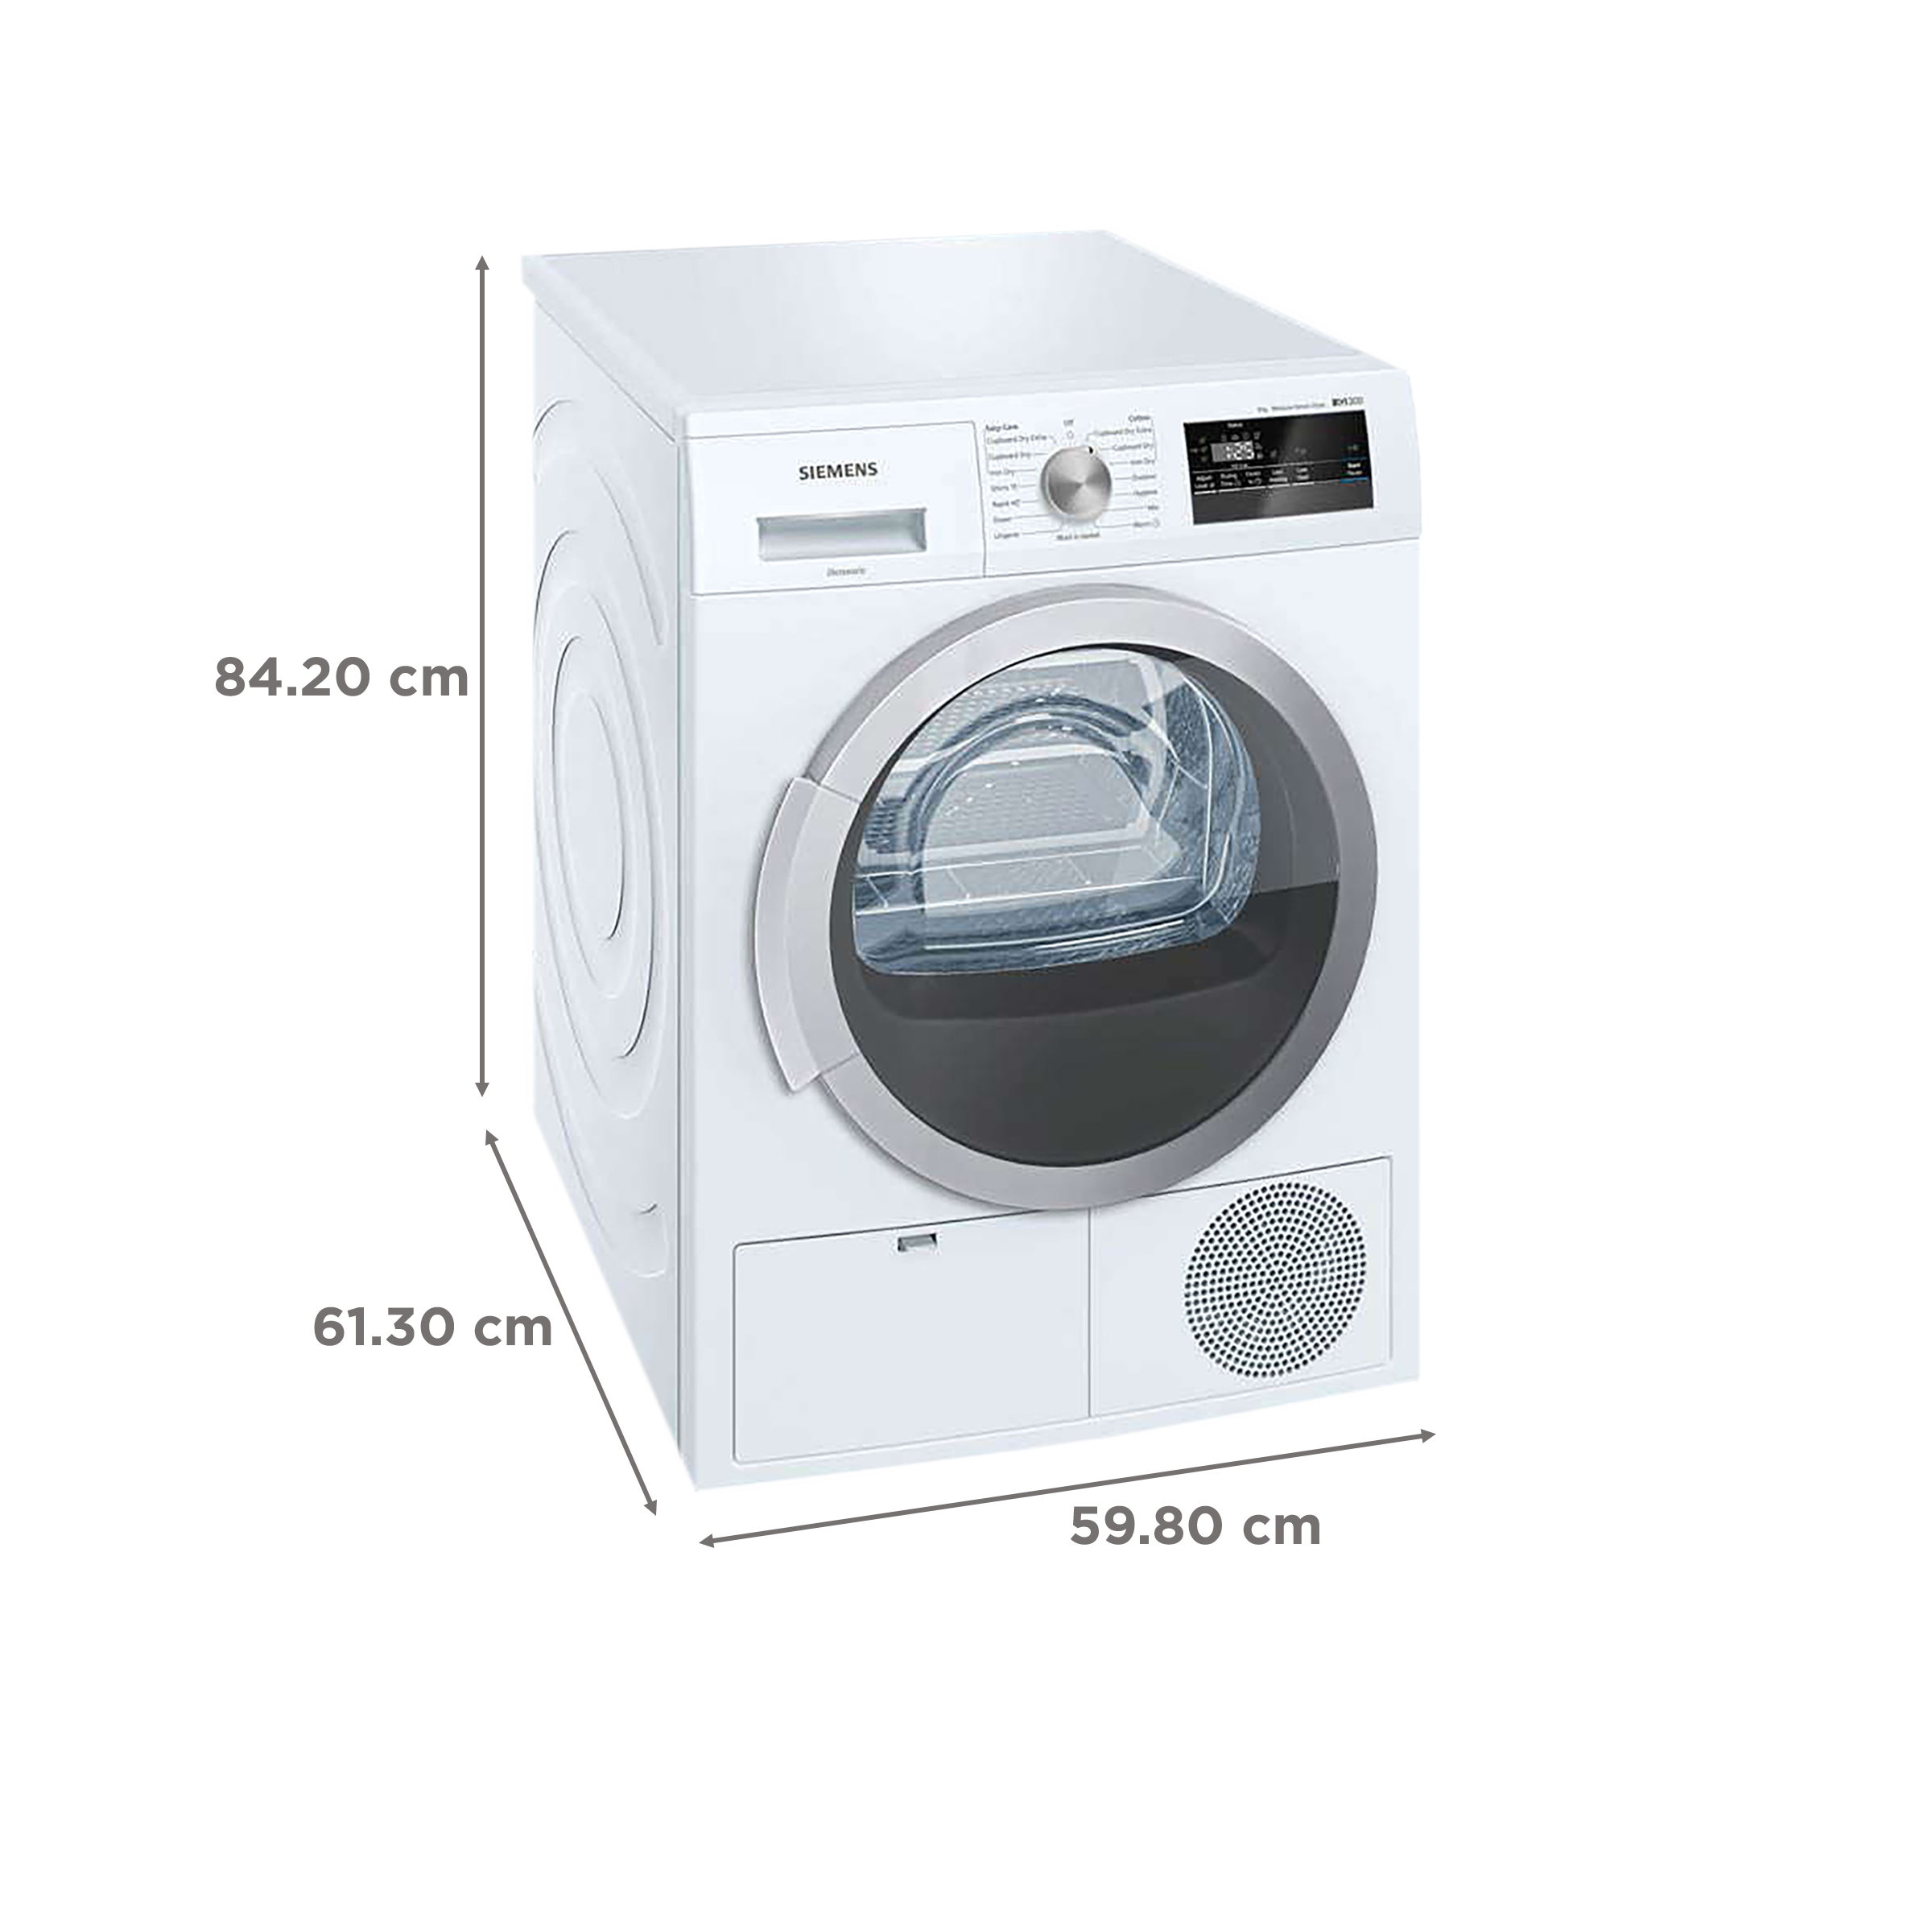 Siemens 8 kg Fully Automatic Front Load Dryer (iQ300, WT44B202IN, Softdry Drum System, White)_3